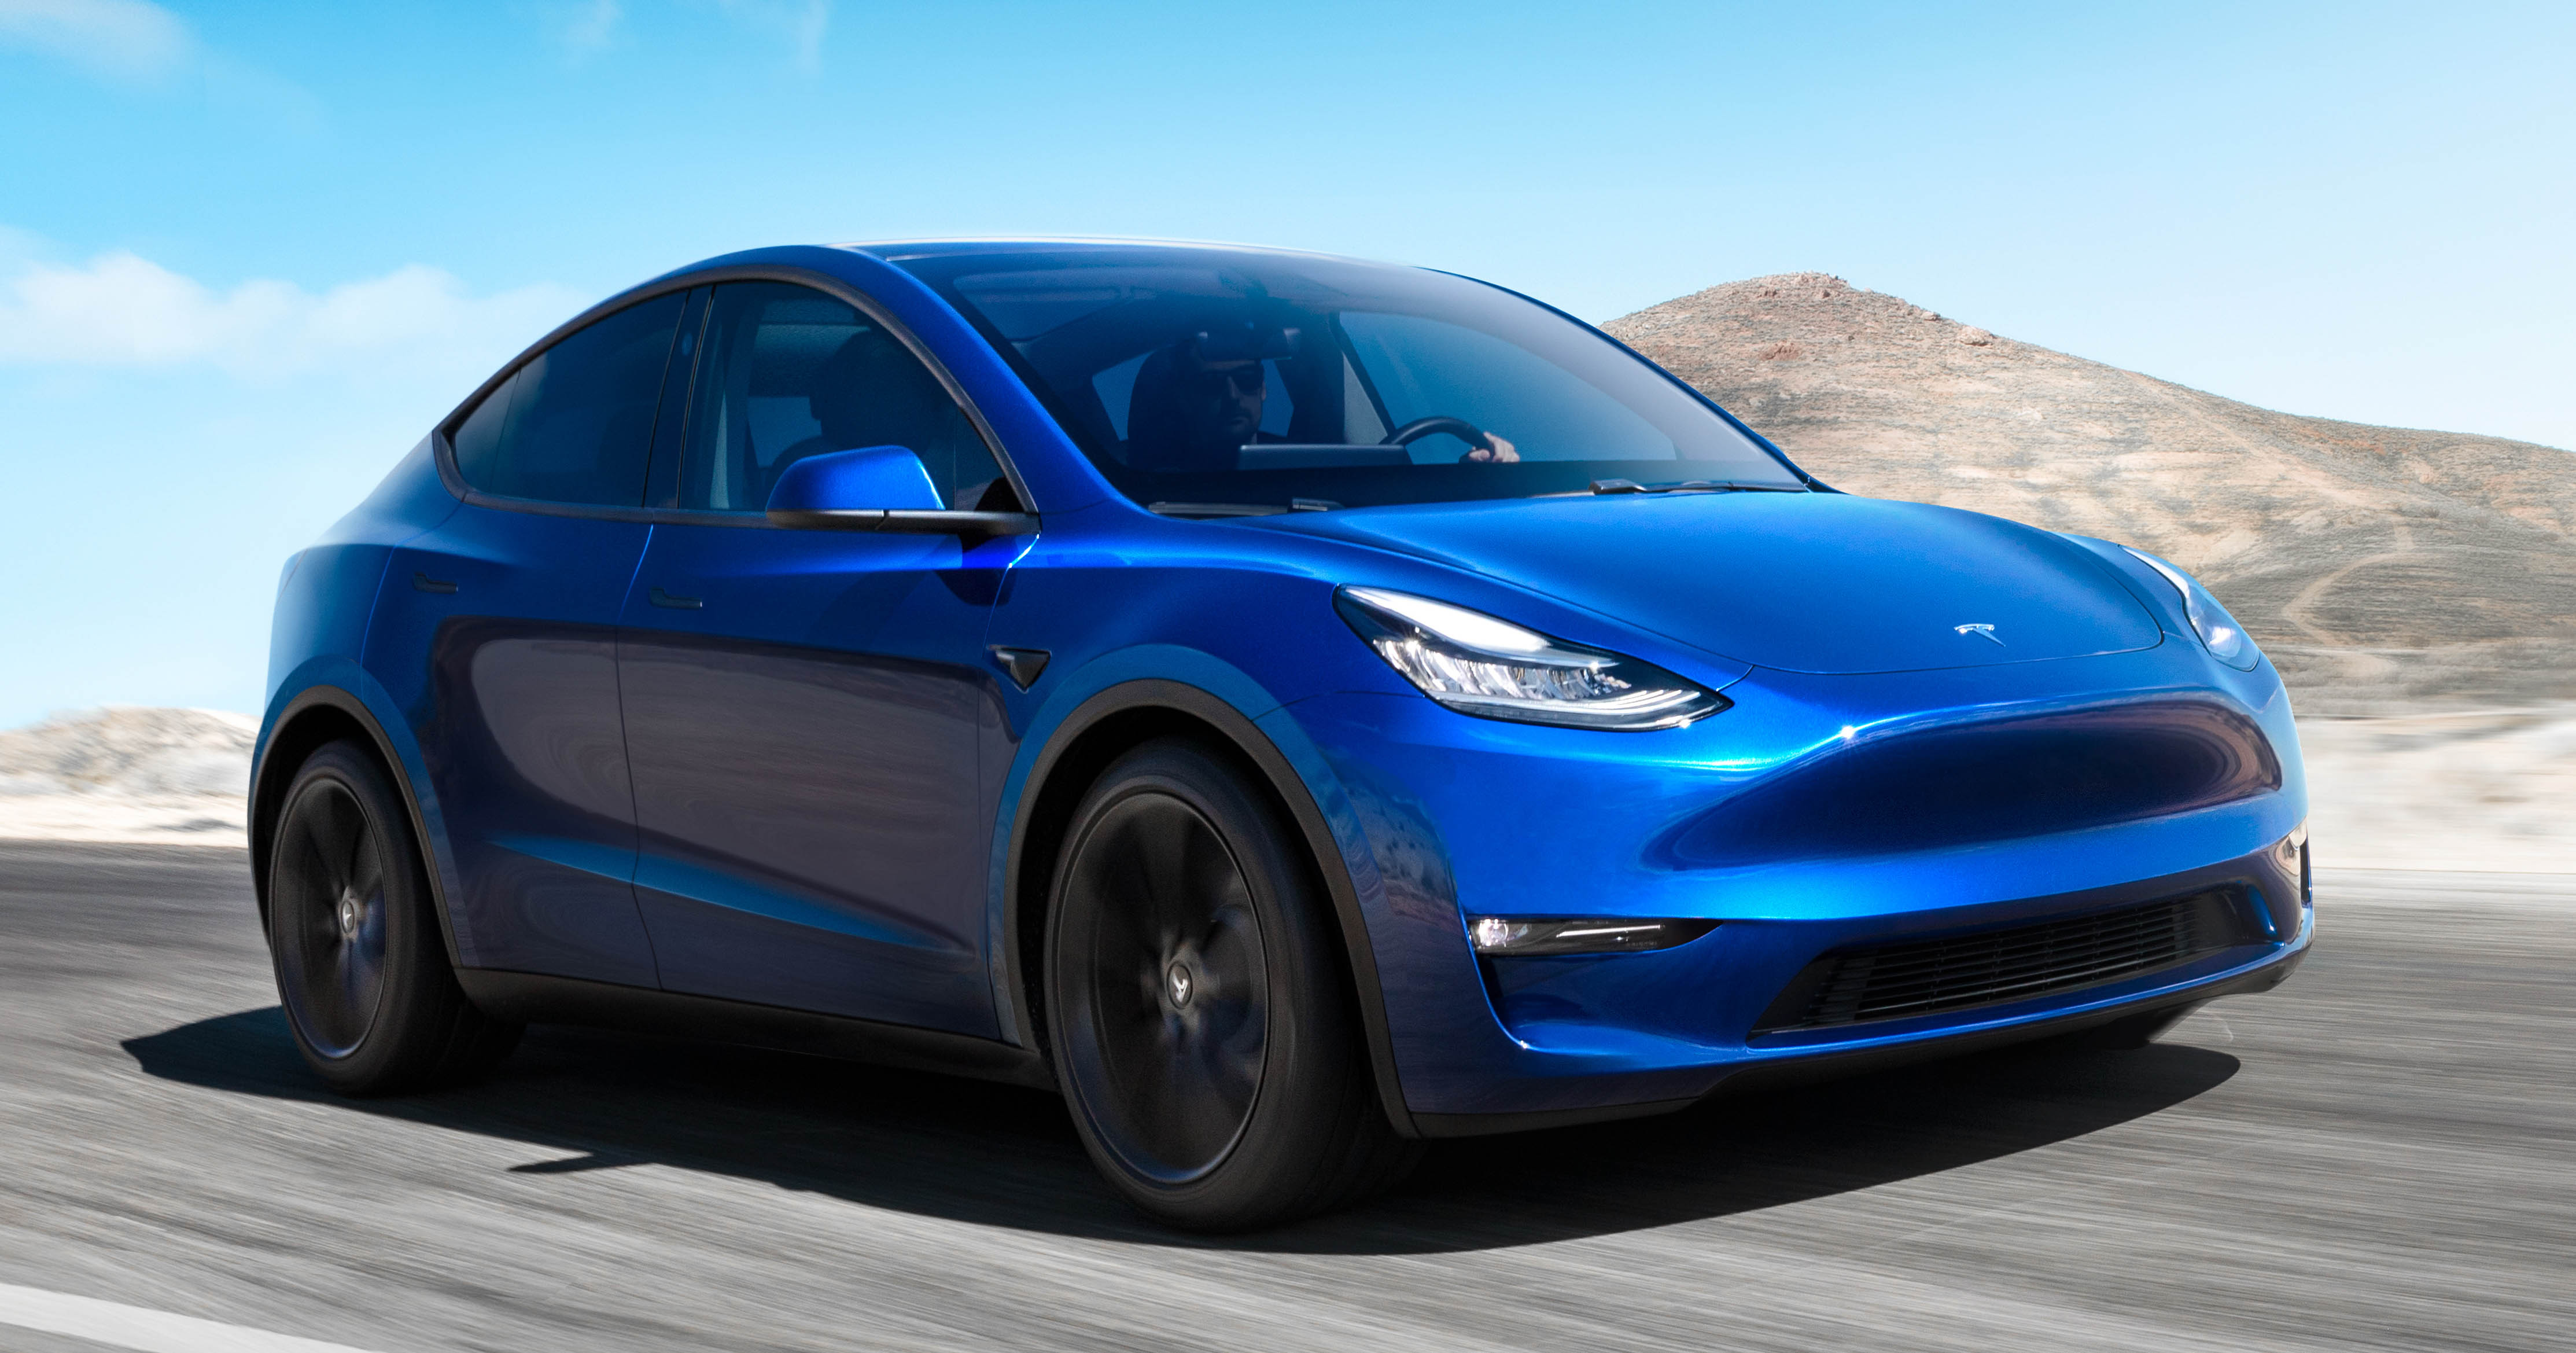 Tesla Model Y Revealed All Electric Suv With Up To Seven Seats 0 96